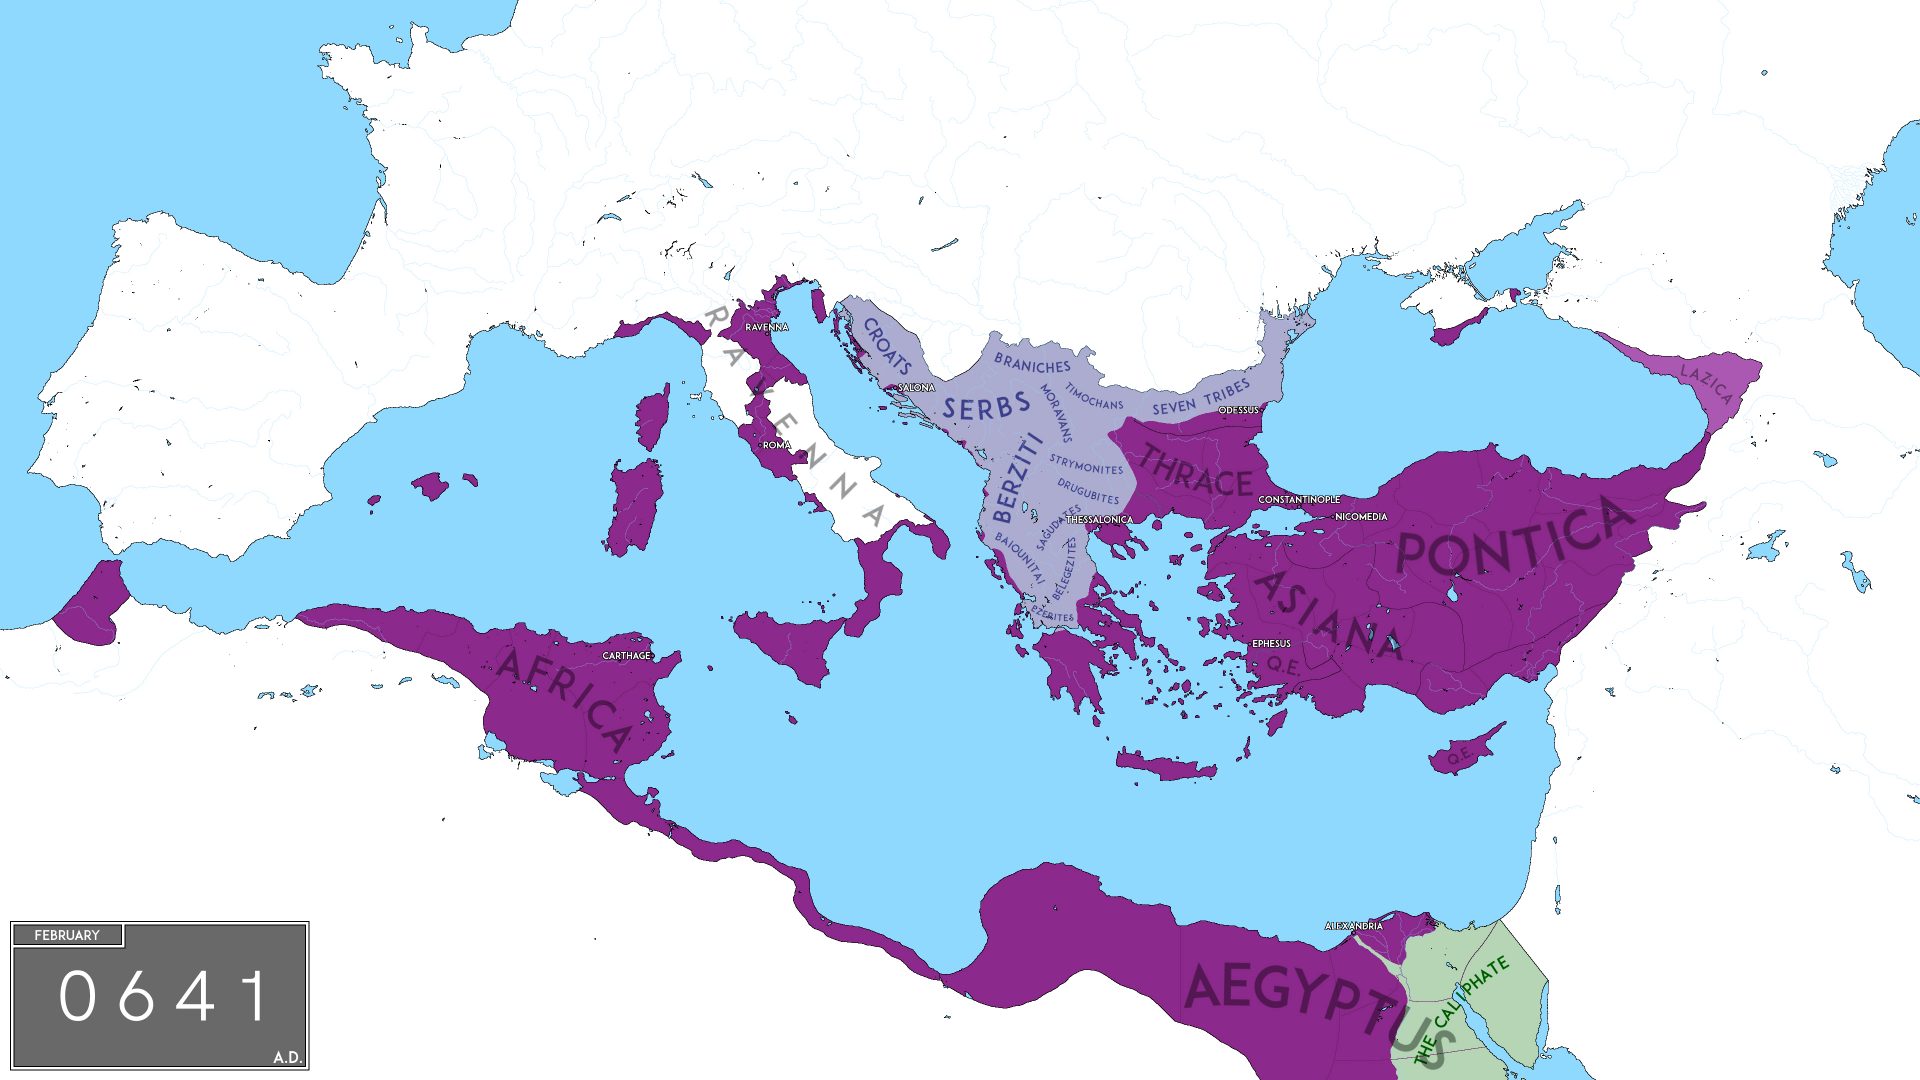 The image depicts a geographical map of the territories controlled by the Eastern Roman Empire, also known as the Byzantine Empire, under the Heraclian Dynasty. The regions under this empire's control are highlighted in purple. From the map, we can see that the Eastern Roman Empire's territories during this period spanned regions including parts of modern-day Italy, Greece, Turkey, Egypt, Israel, Lebanon, Syria, parts of northern Africa, and more. The label "0641 A.D." indicates that the map represents the state of the empire in the year 641 A.D., a pivotal time in Byzantine history. Various place names are labeled, such as "Ravenna," "Rome," "Constantinople" (modern-day Istanbul), "Thrace," "Pontica," "Asia," and "Africa." Additionally, the surrounding territories and tribes, like "Serbs" and "Berbers," are marked, providing context about neighboring entities and regions during this era. In the bottom right corner, a part labeled "AEGYPTU" (referring to Egypt) is depicted in a different color, indicating the emergence of the Arab Caliphate in the region, which was a significant geopolitical development during this period.